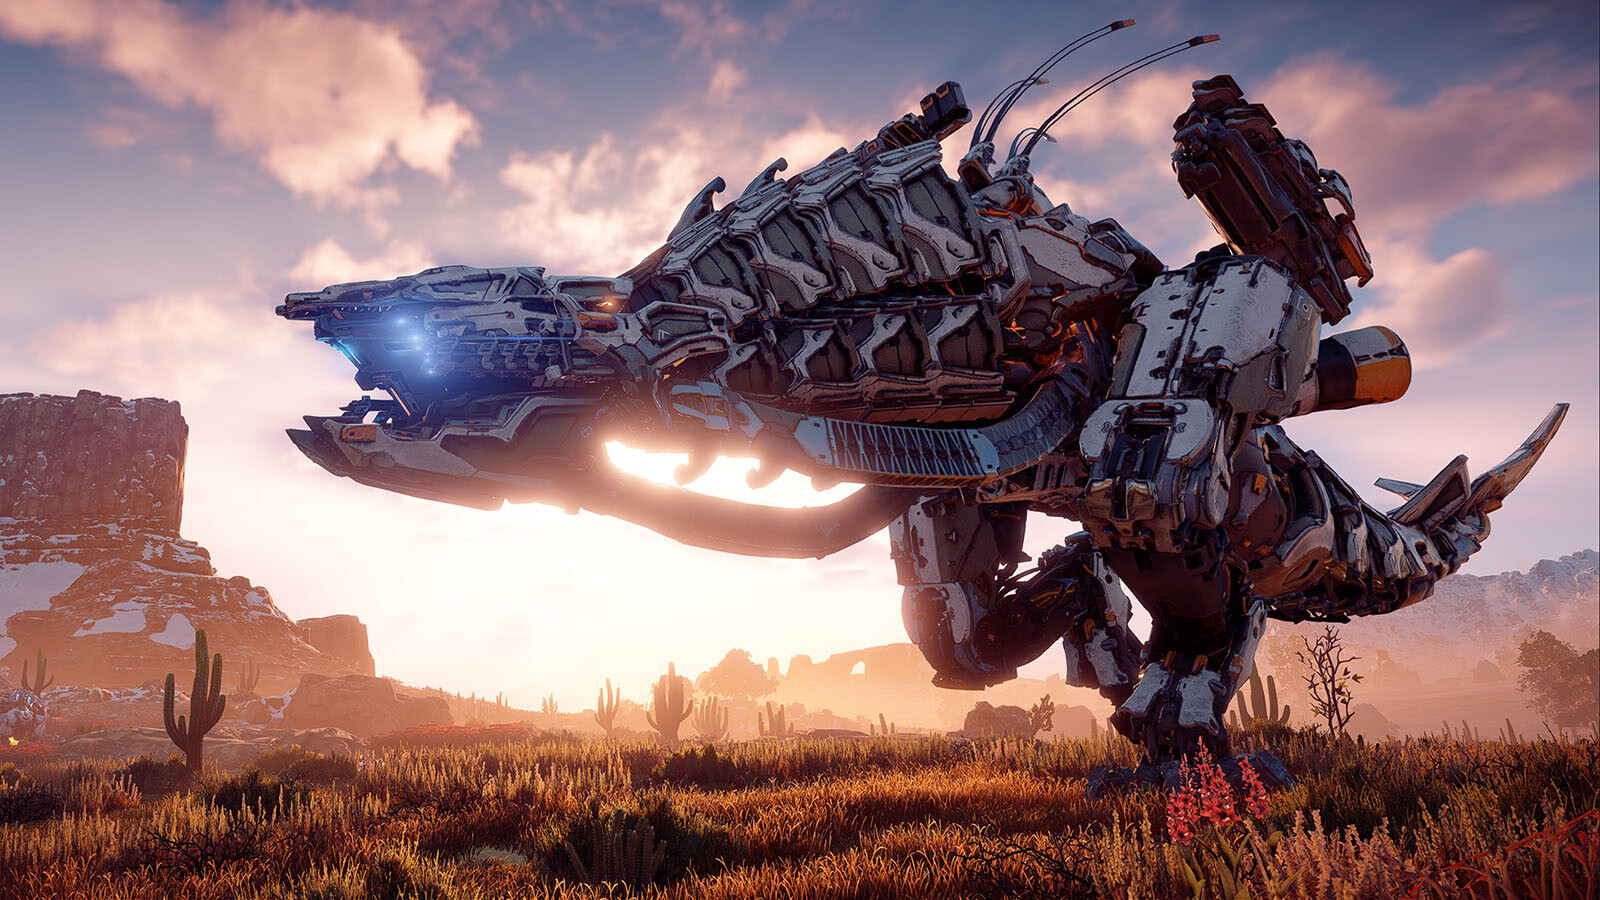 Buy cheap Horizon Zero Dawn Complete Edition Steam key at the best price